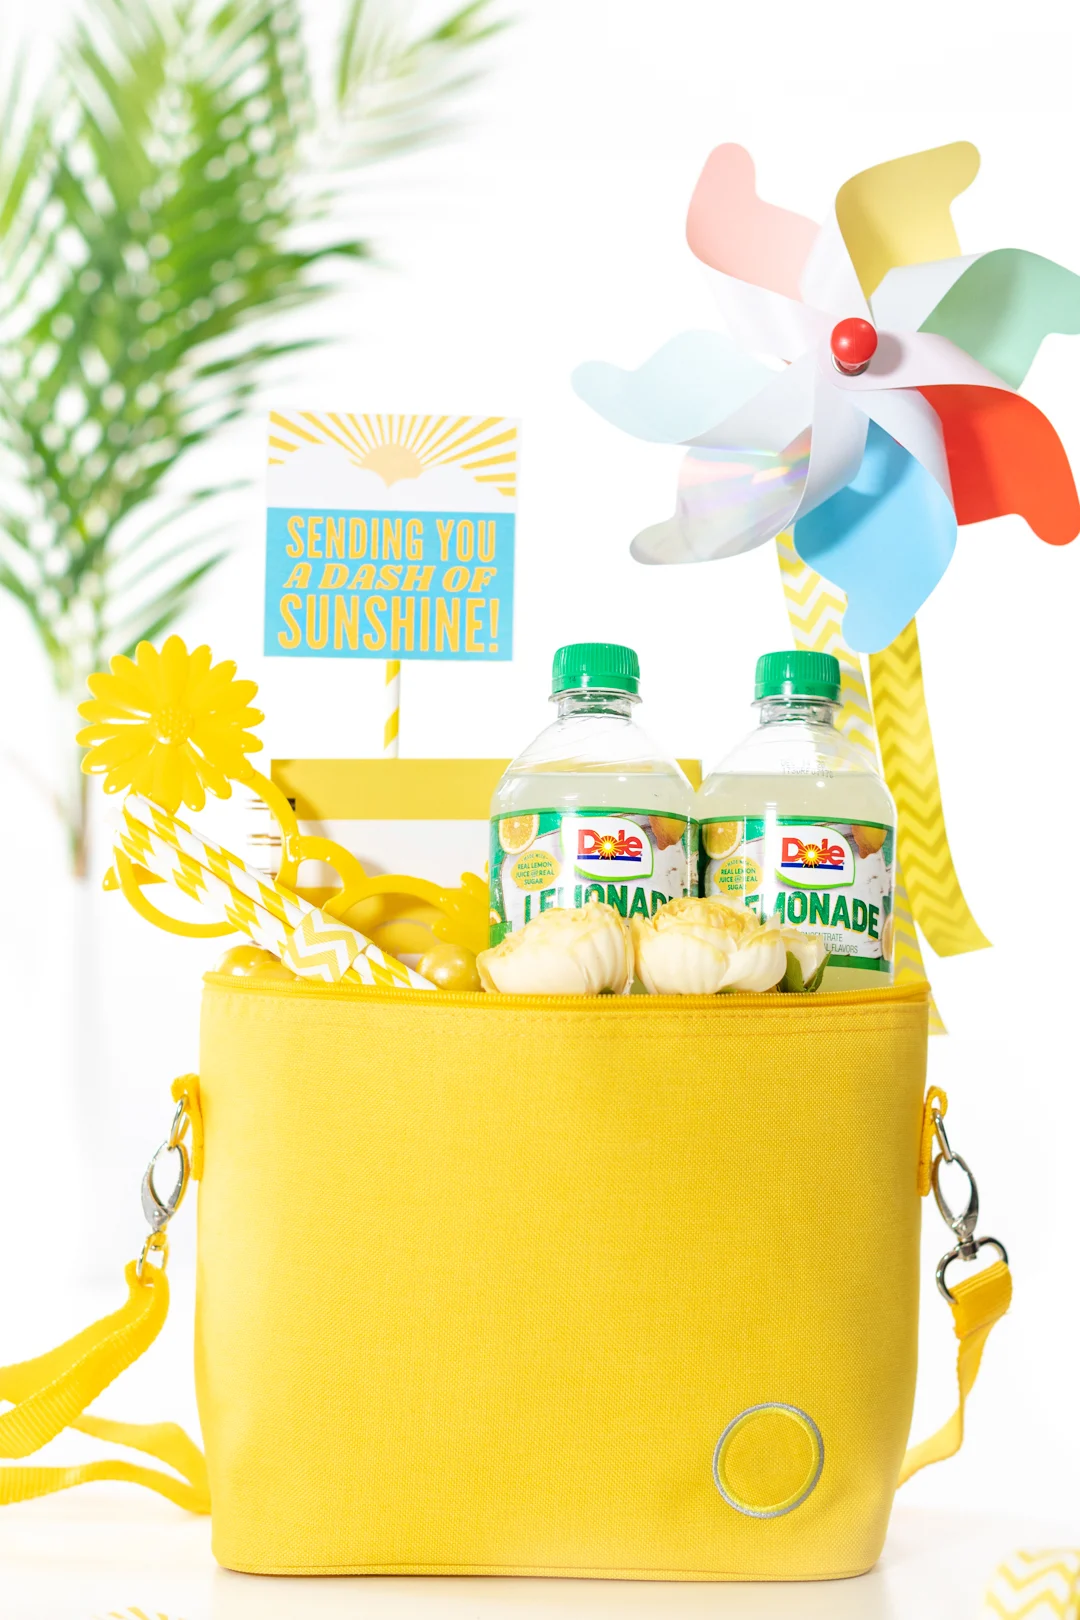 Fun sunshine mini cooler filled with cold drinks, novelty trinkets for a surprise delivery